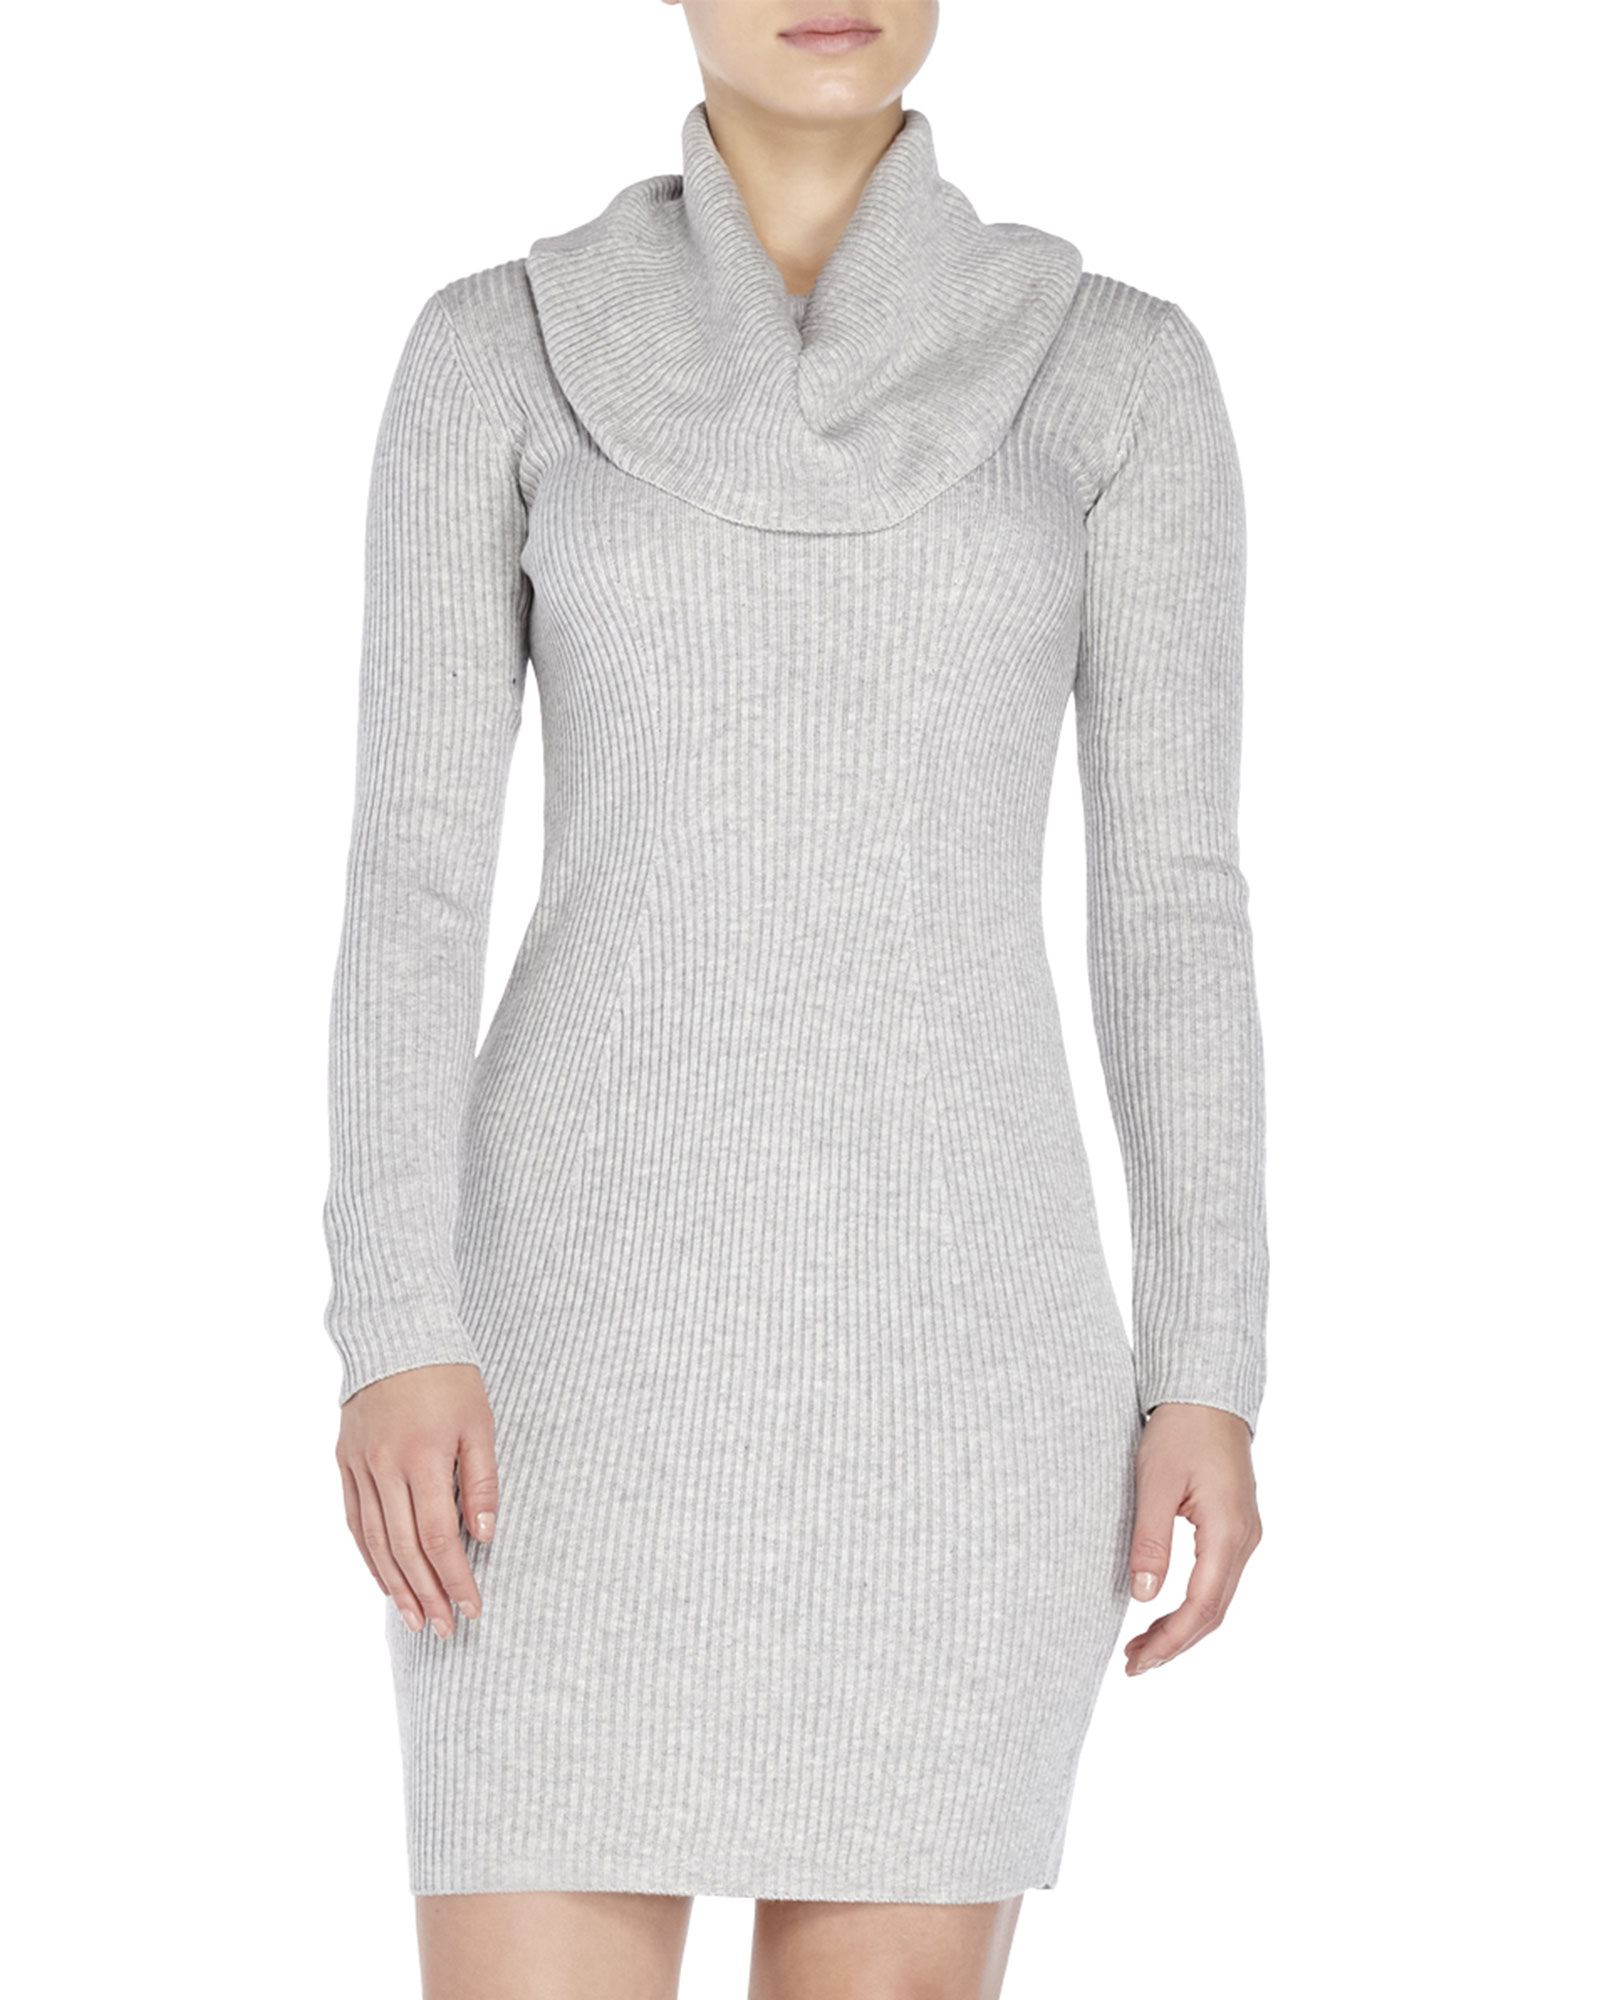 Lyst - Marc New York Cowl Neck Ribbed Sweater Dress in Metallic